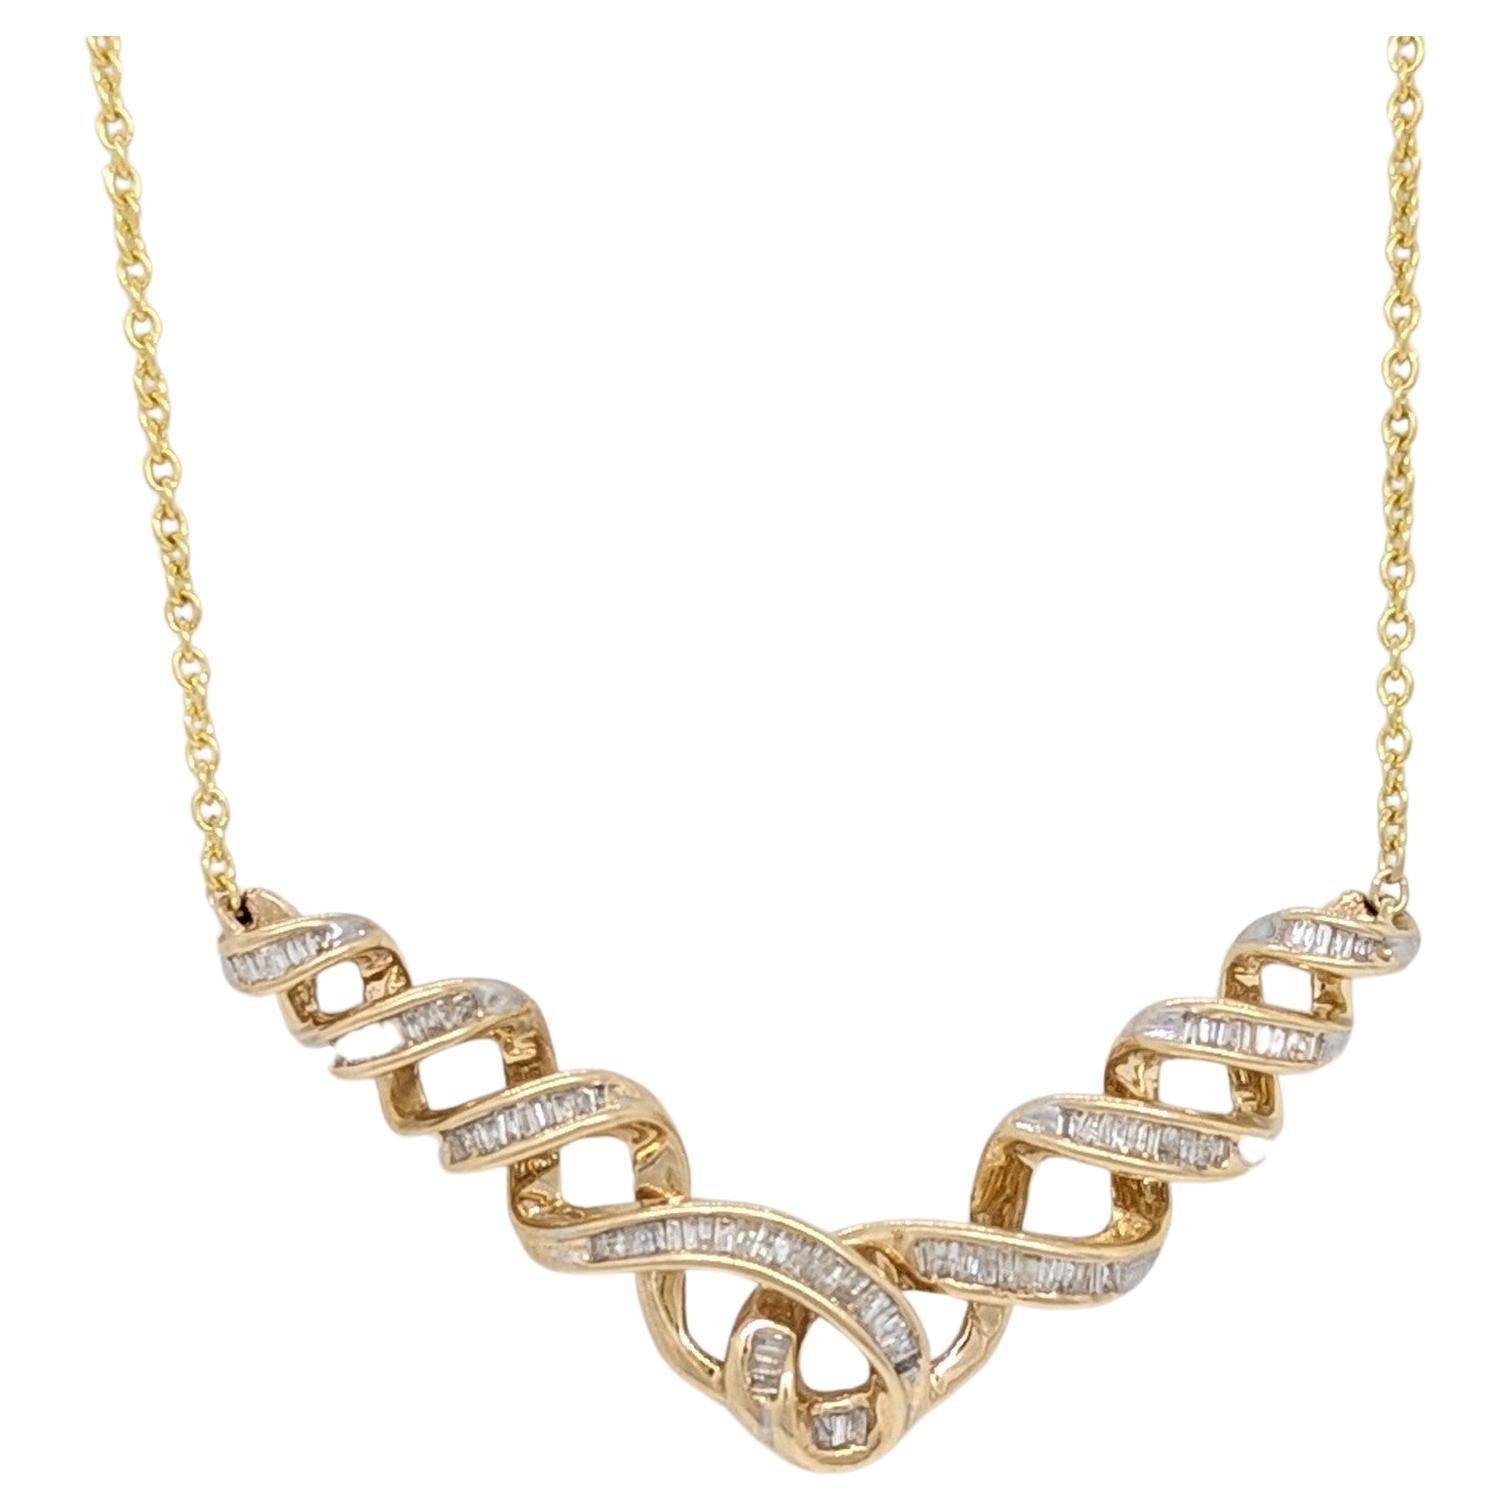 White Diamond Baguette Necklace in 14K Yellow Gold